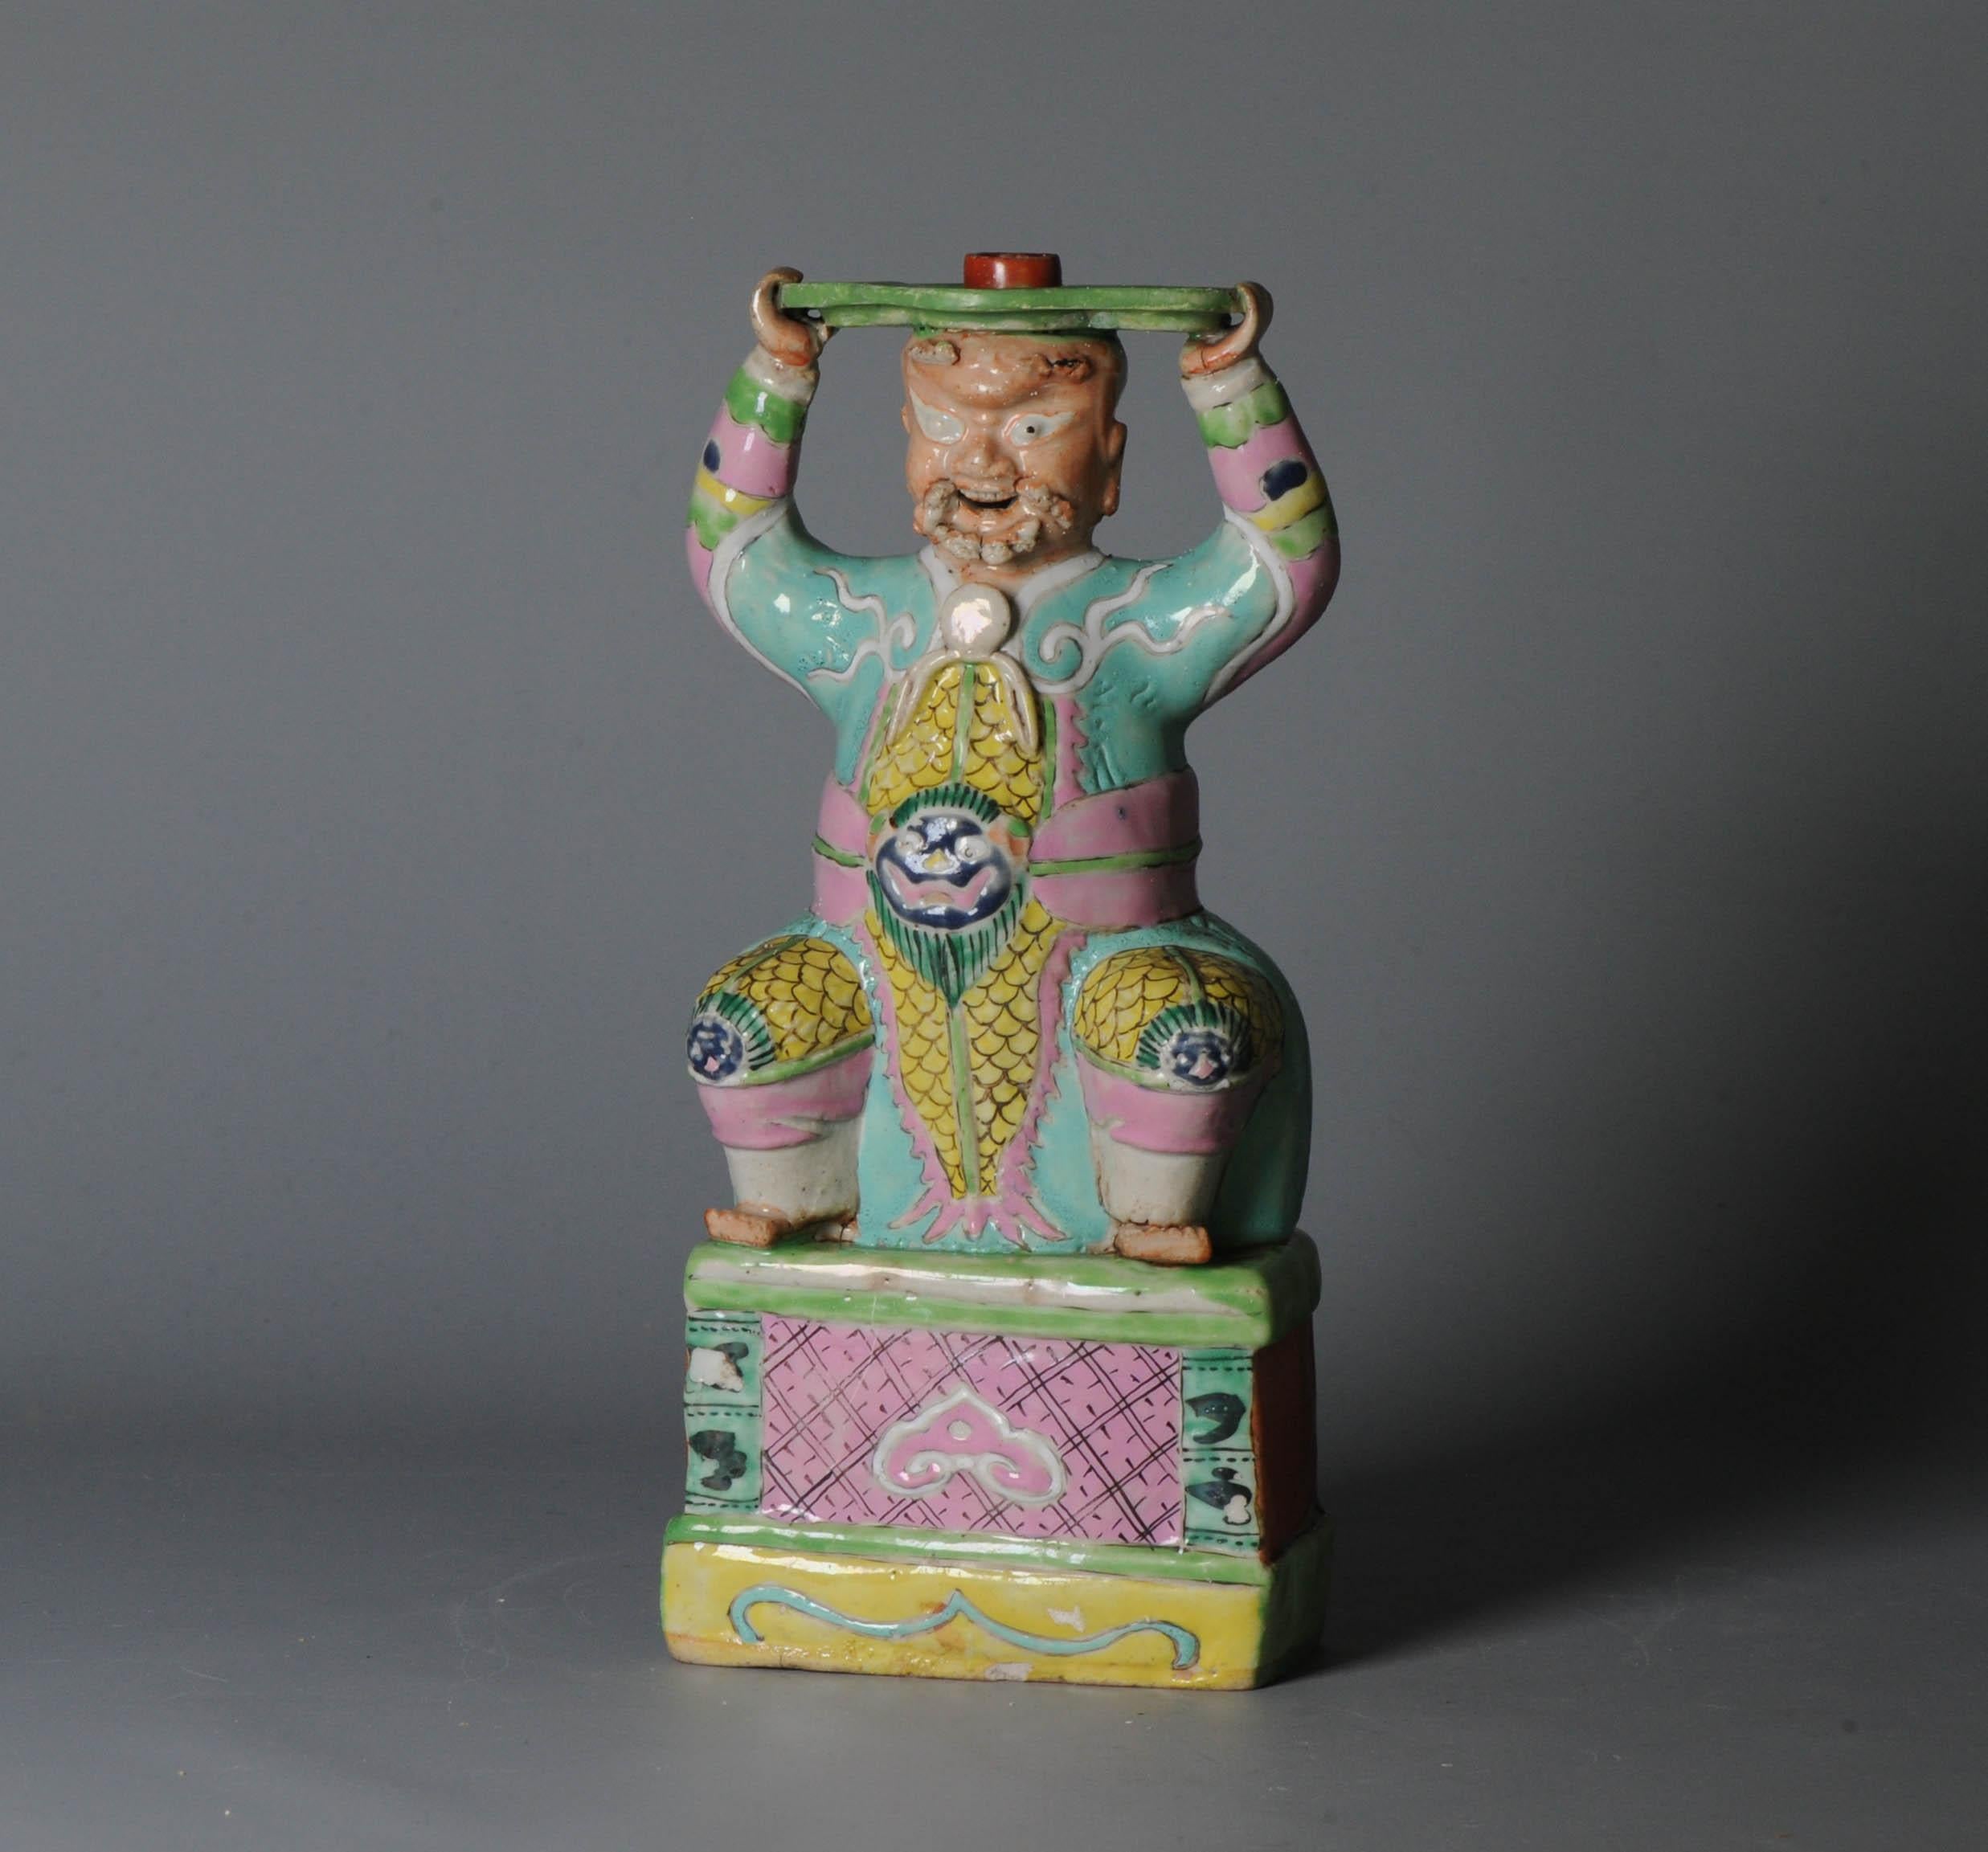 Antique 18th C Chinese Statue Porcelain Figure Chinese Candle Holder In Good Condition For Sale In Amsterdam, Noord Holland